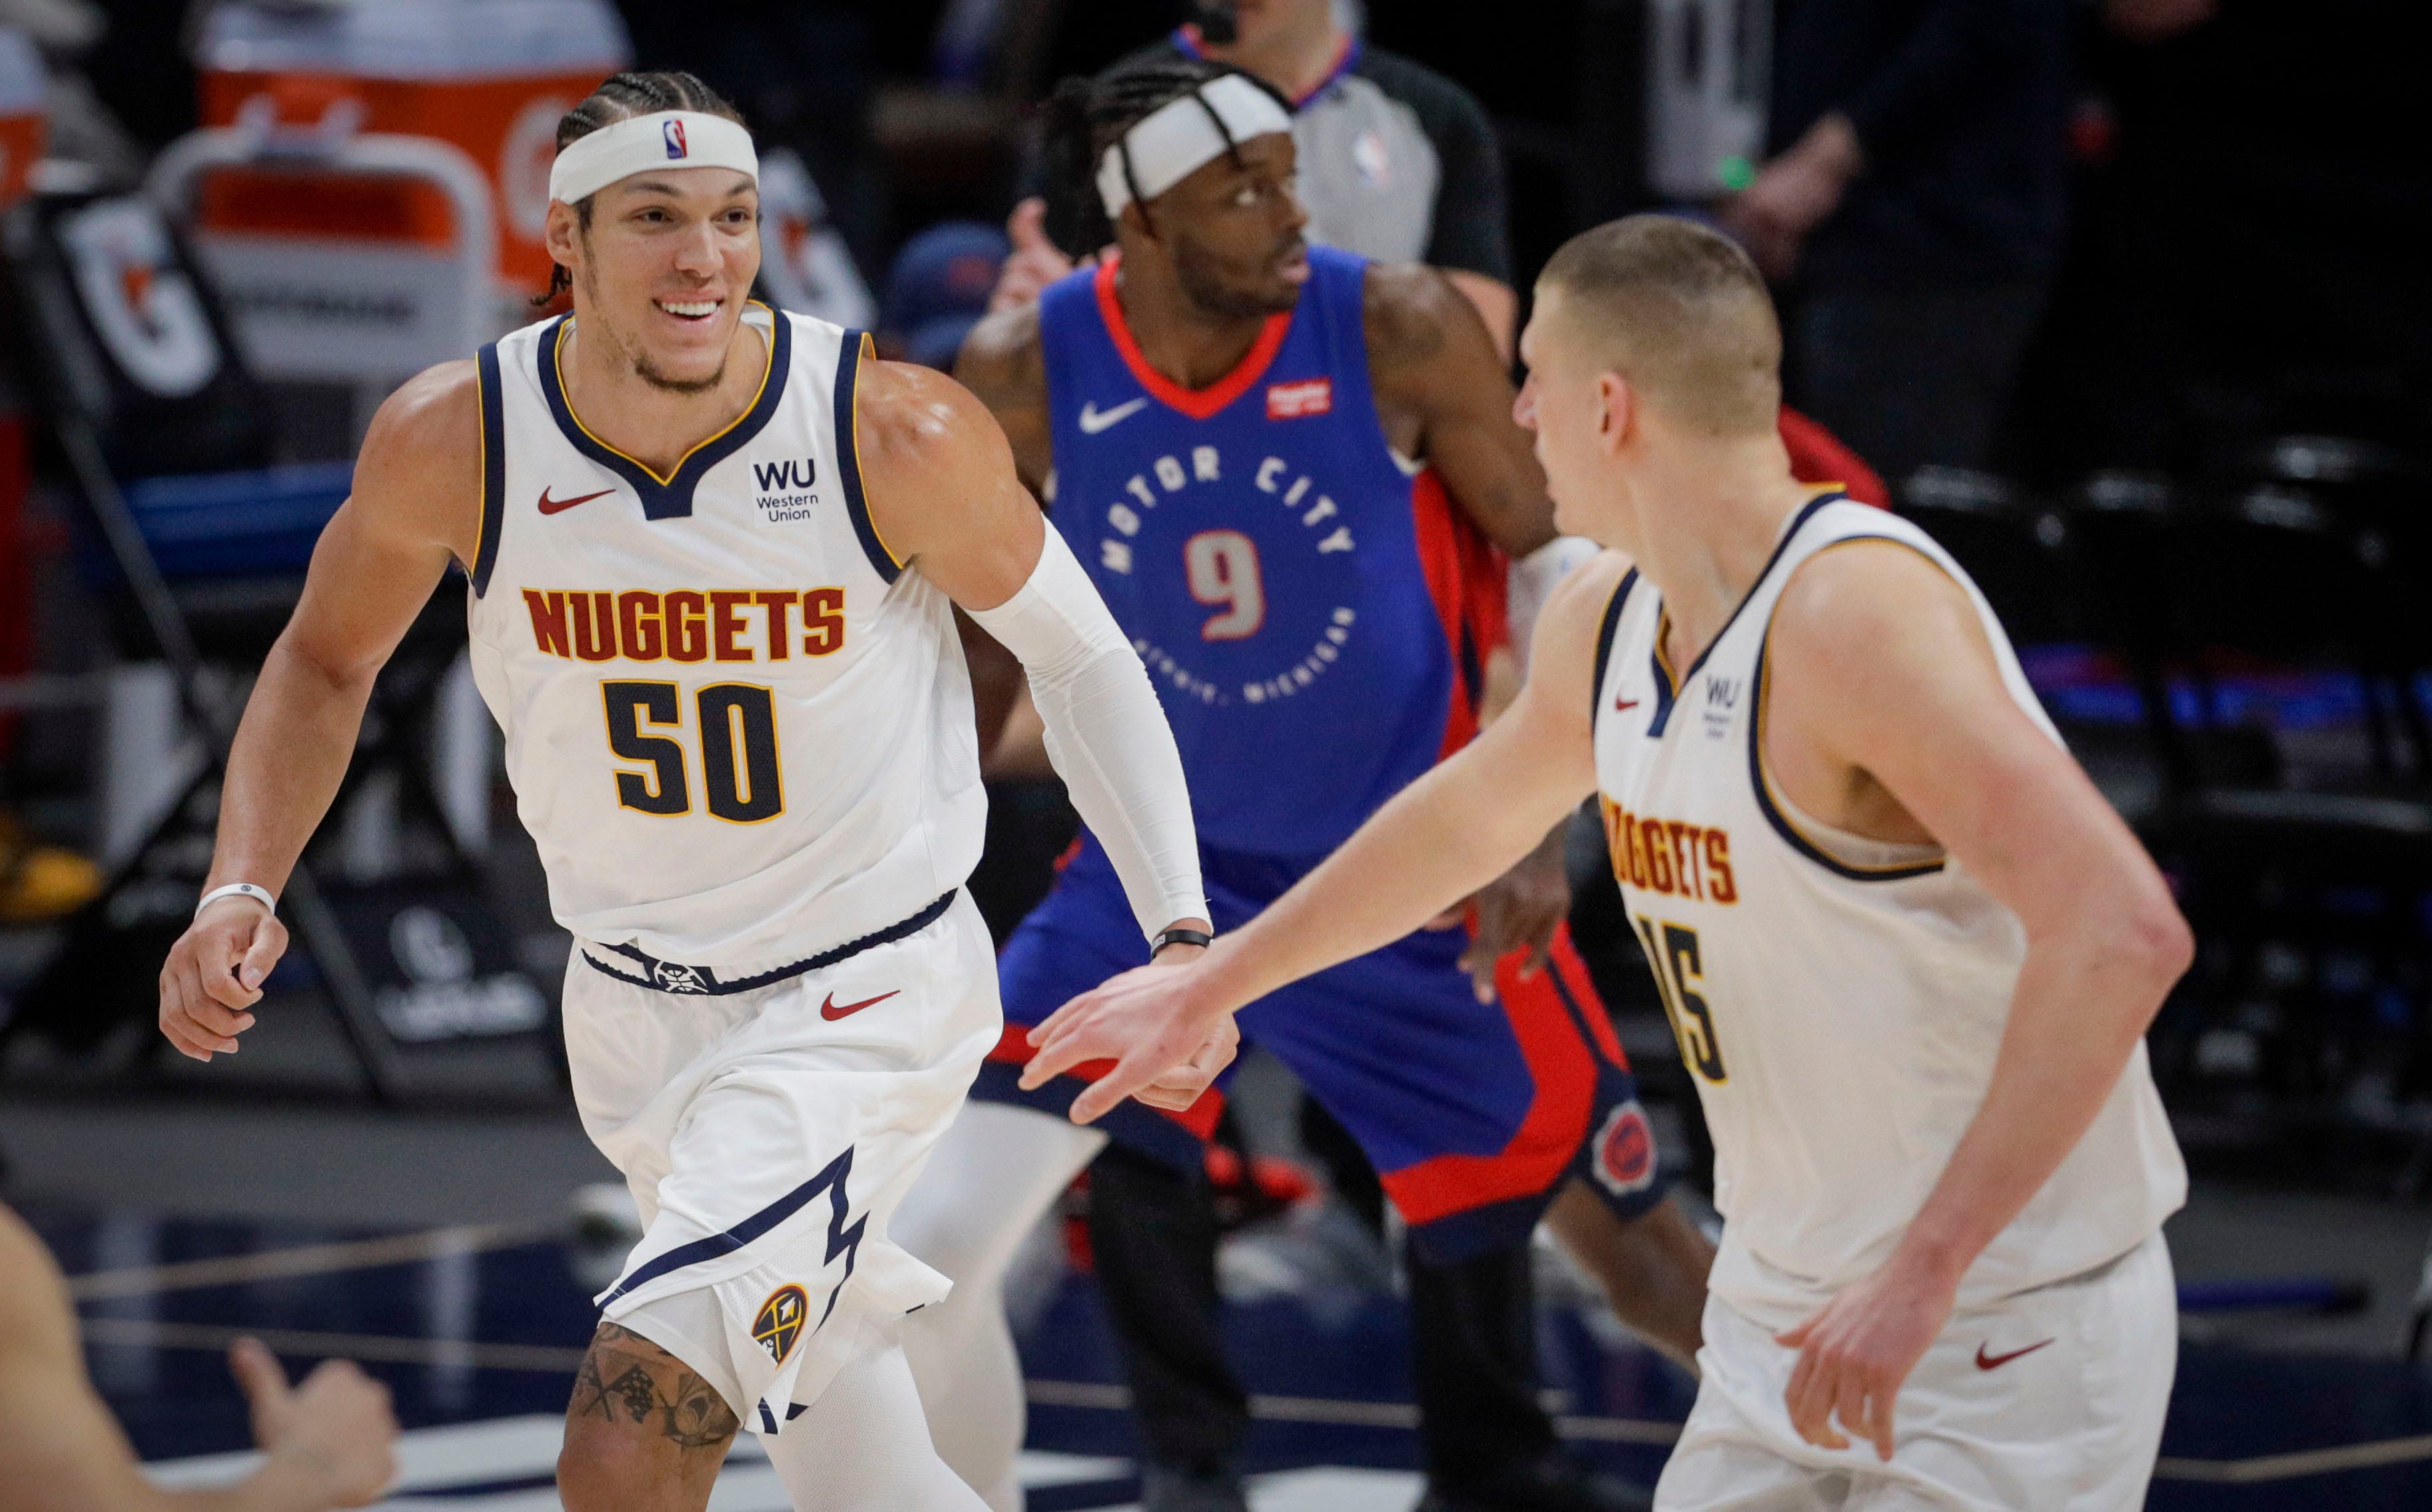 Denver Nuggets forward Aaron Gordon (50) smiles as he runs back up the court with center Nikola Jokic (15) in the third quarter of an NBA basketball game against the Detroit Pistons in Denver, Tuesday, April 6, 2021.